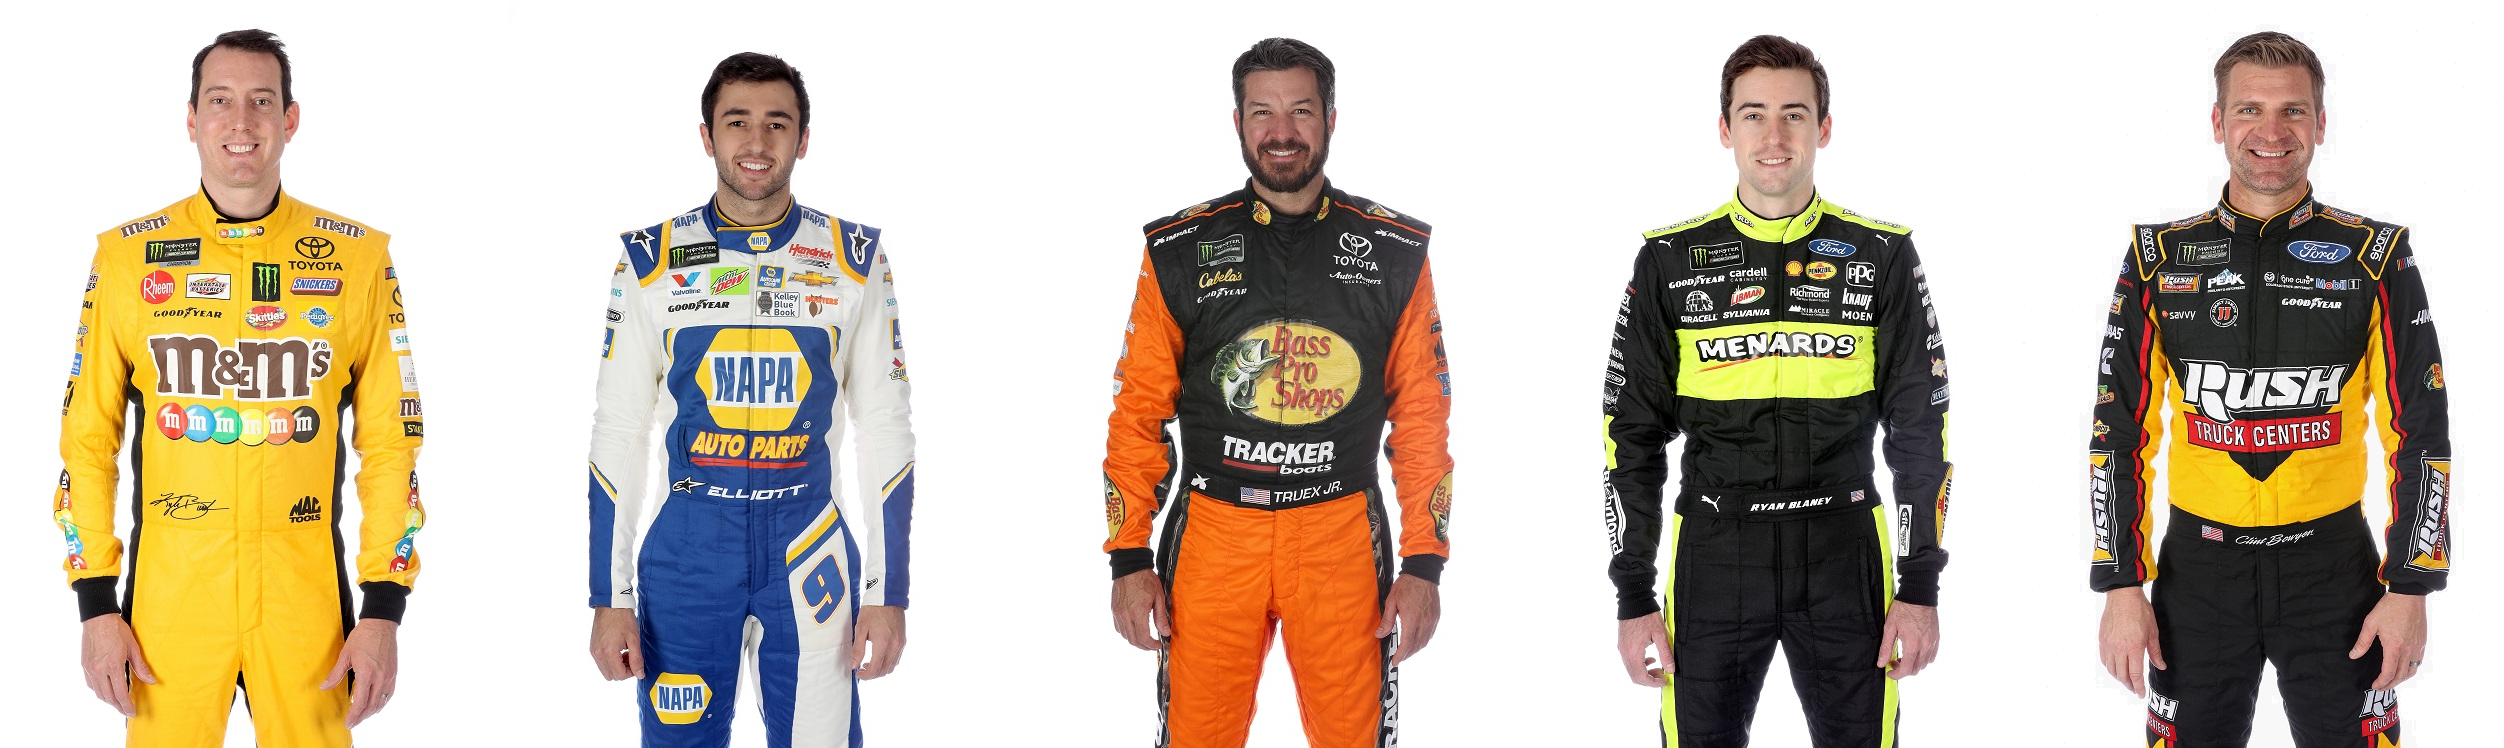 Might one of these five emerge victorious in today's Bank of America ROVAL 400?